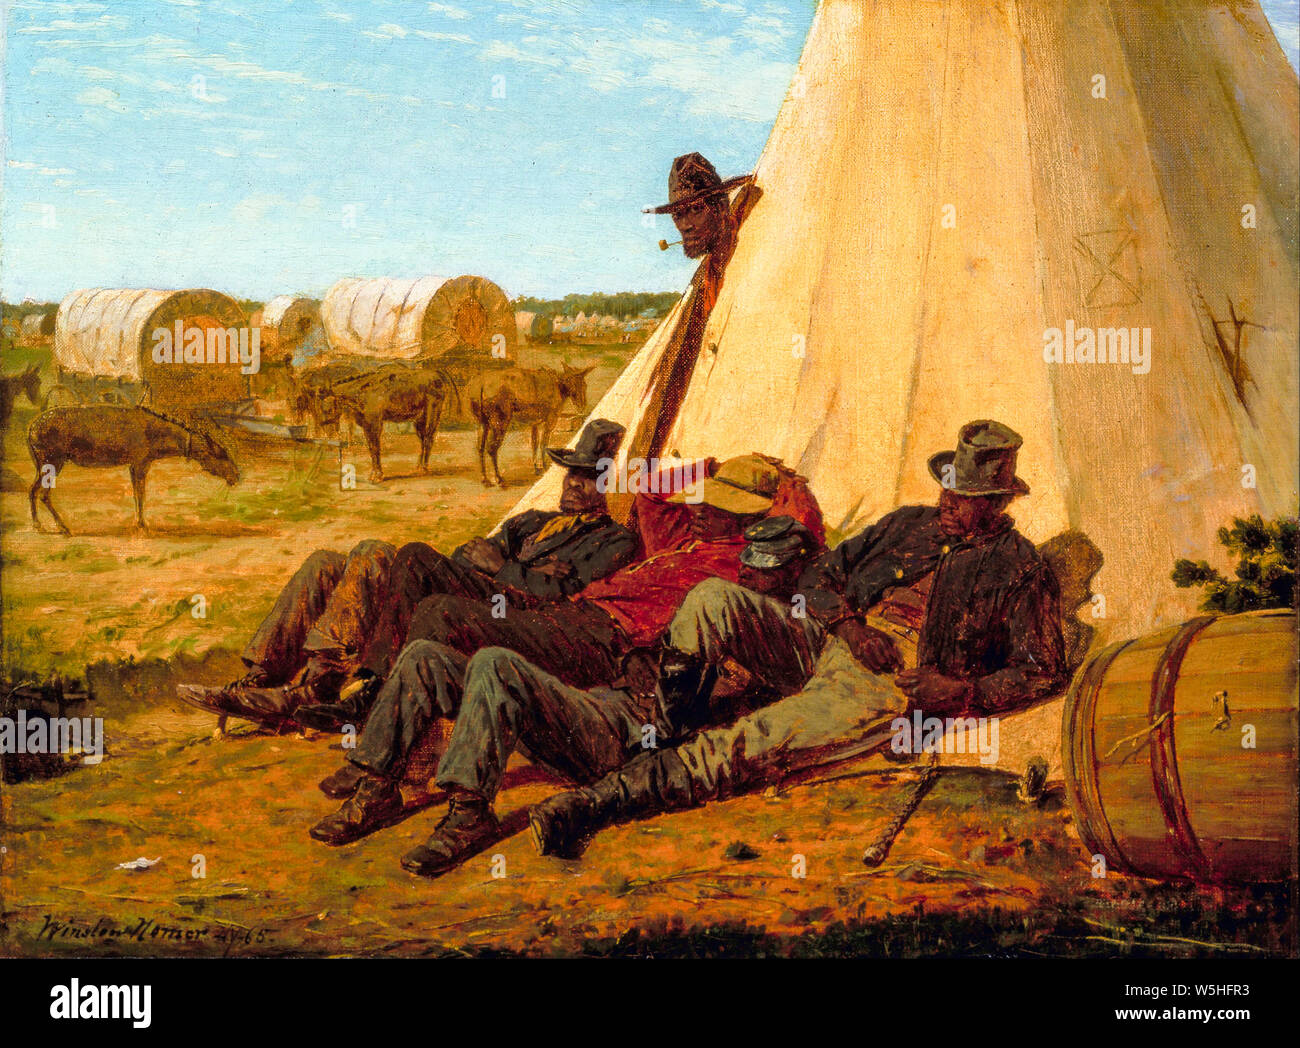 Winslow Homer, painting, The Bright Side, 1865 Stock Photo